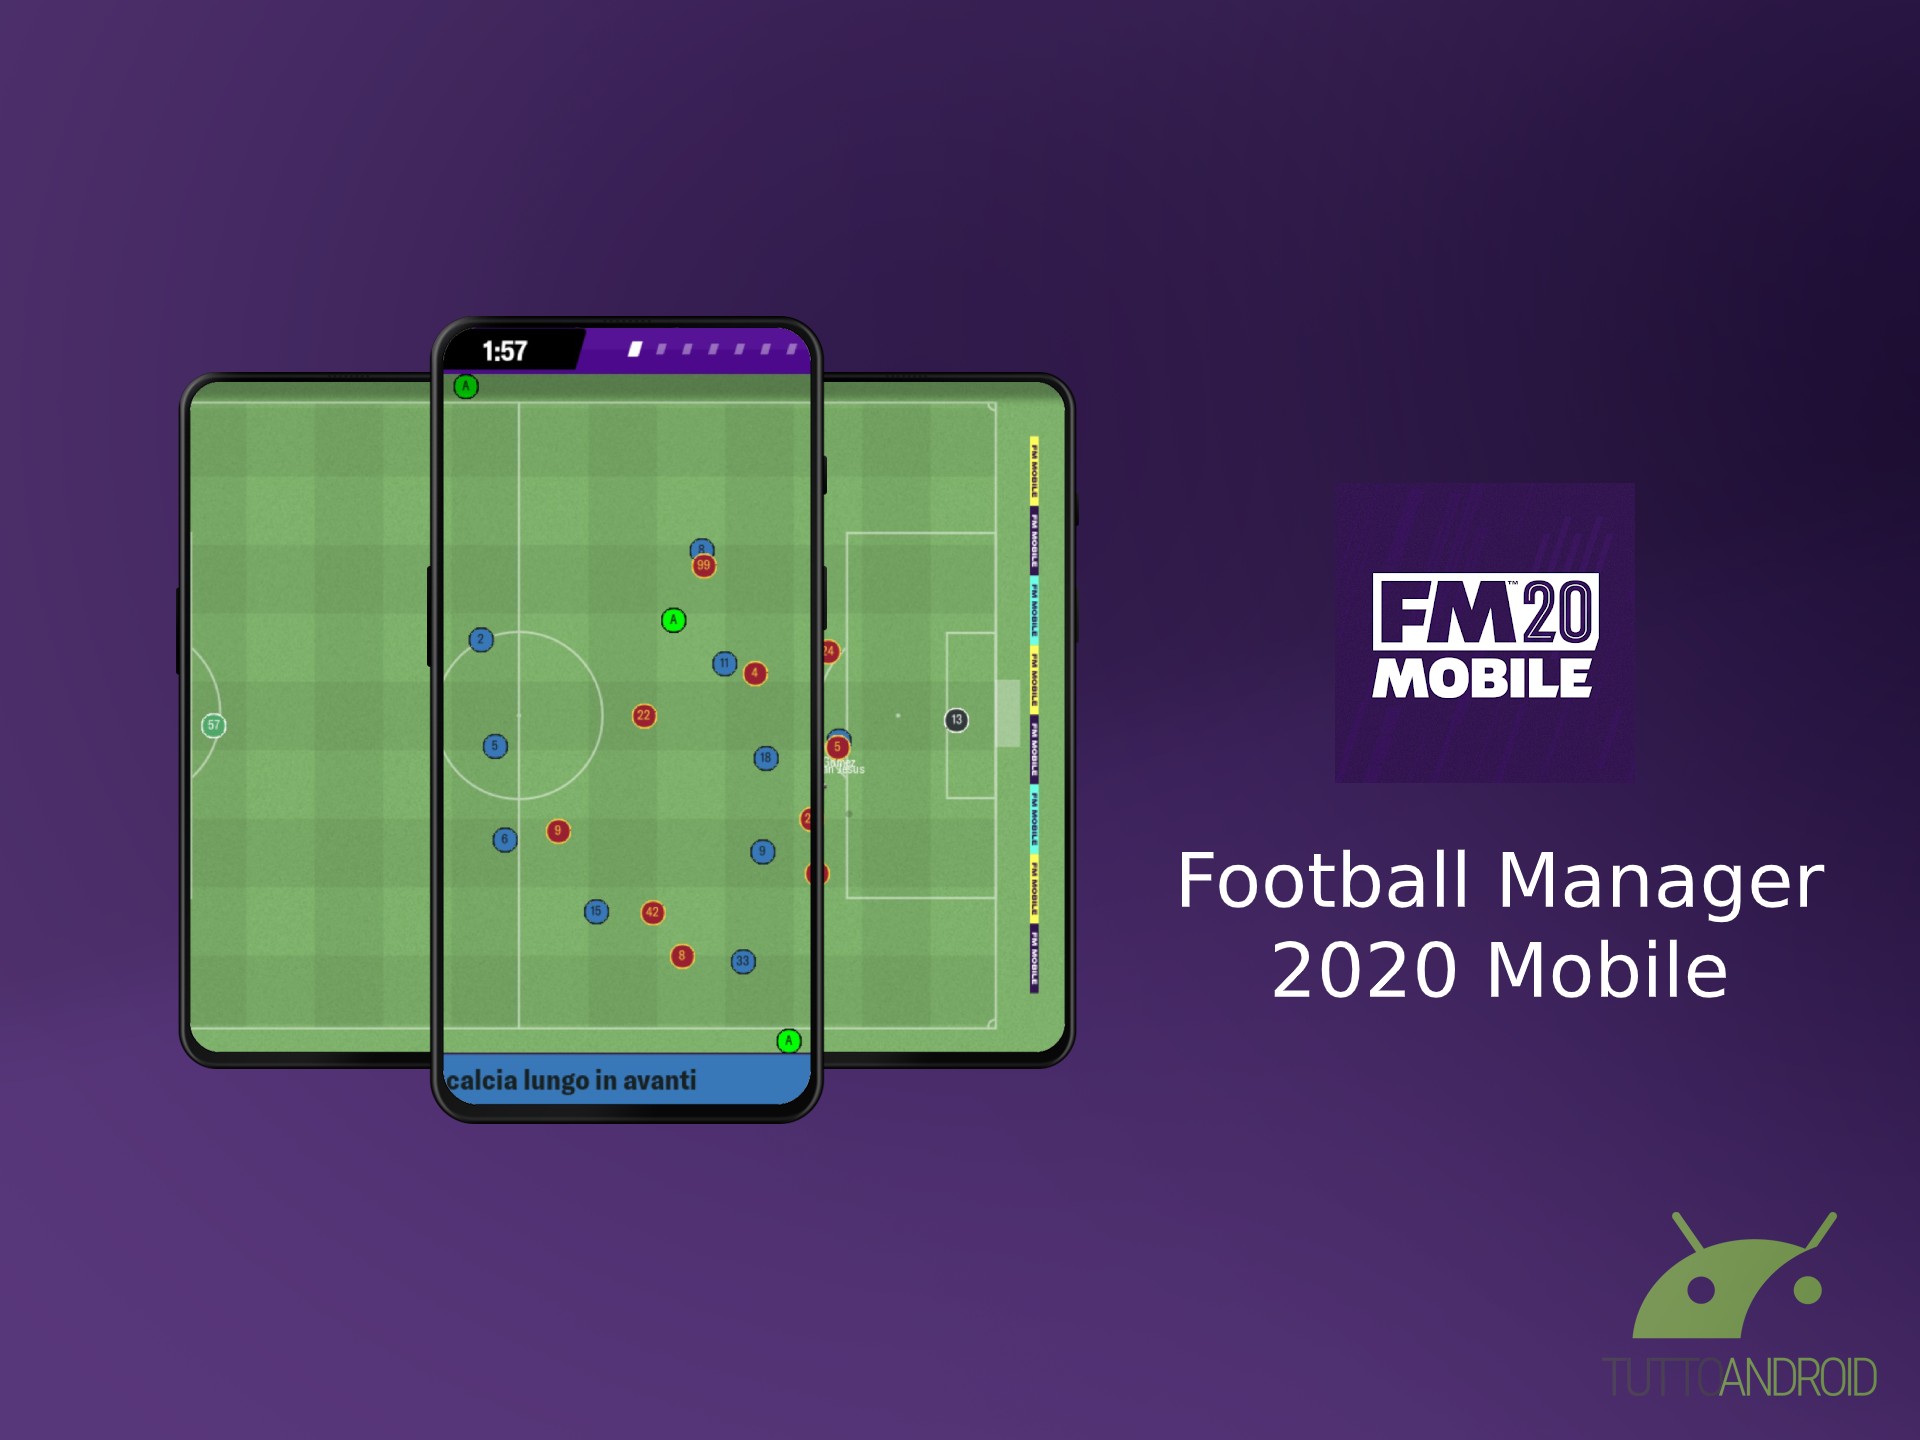 football manager 2020 xbox one